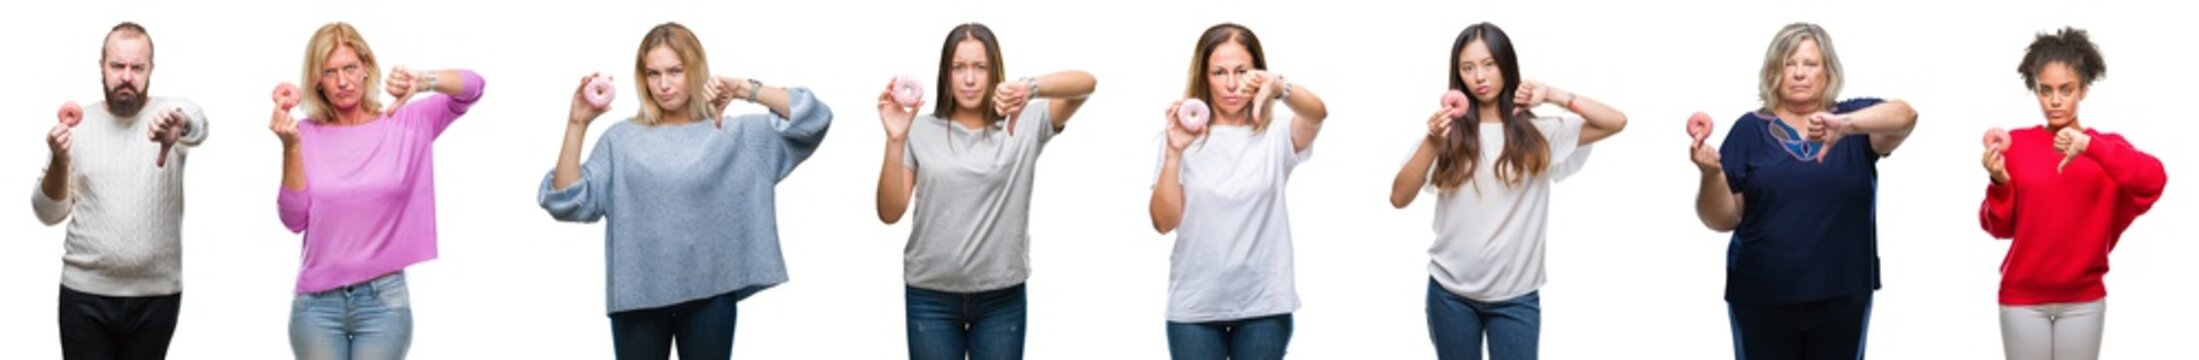 Collage of group of people eating donut over isolated background with angry face, negative sign showing dislike with thumbs down, rejection concept